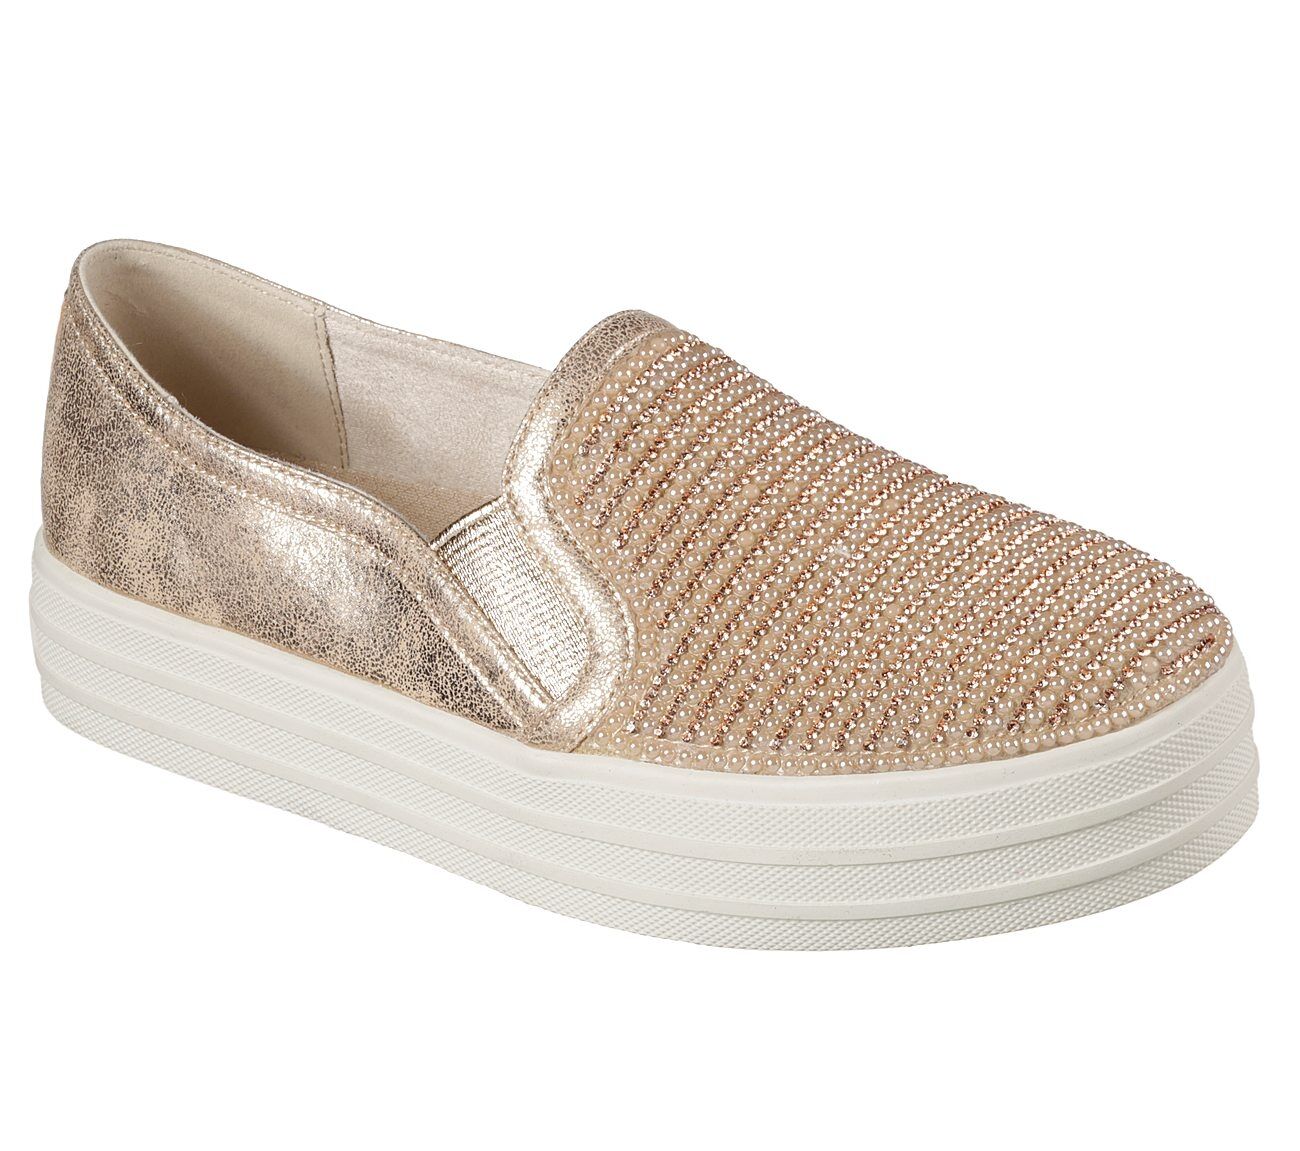 Skechers Double Up Shiny Dancer Gold 